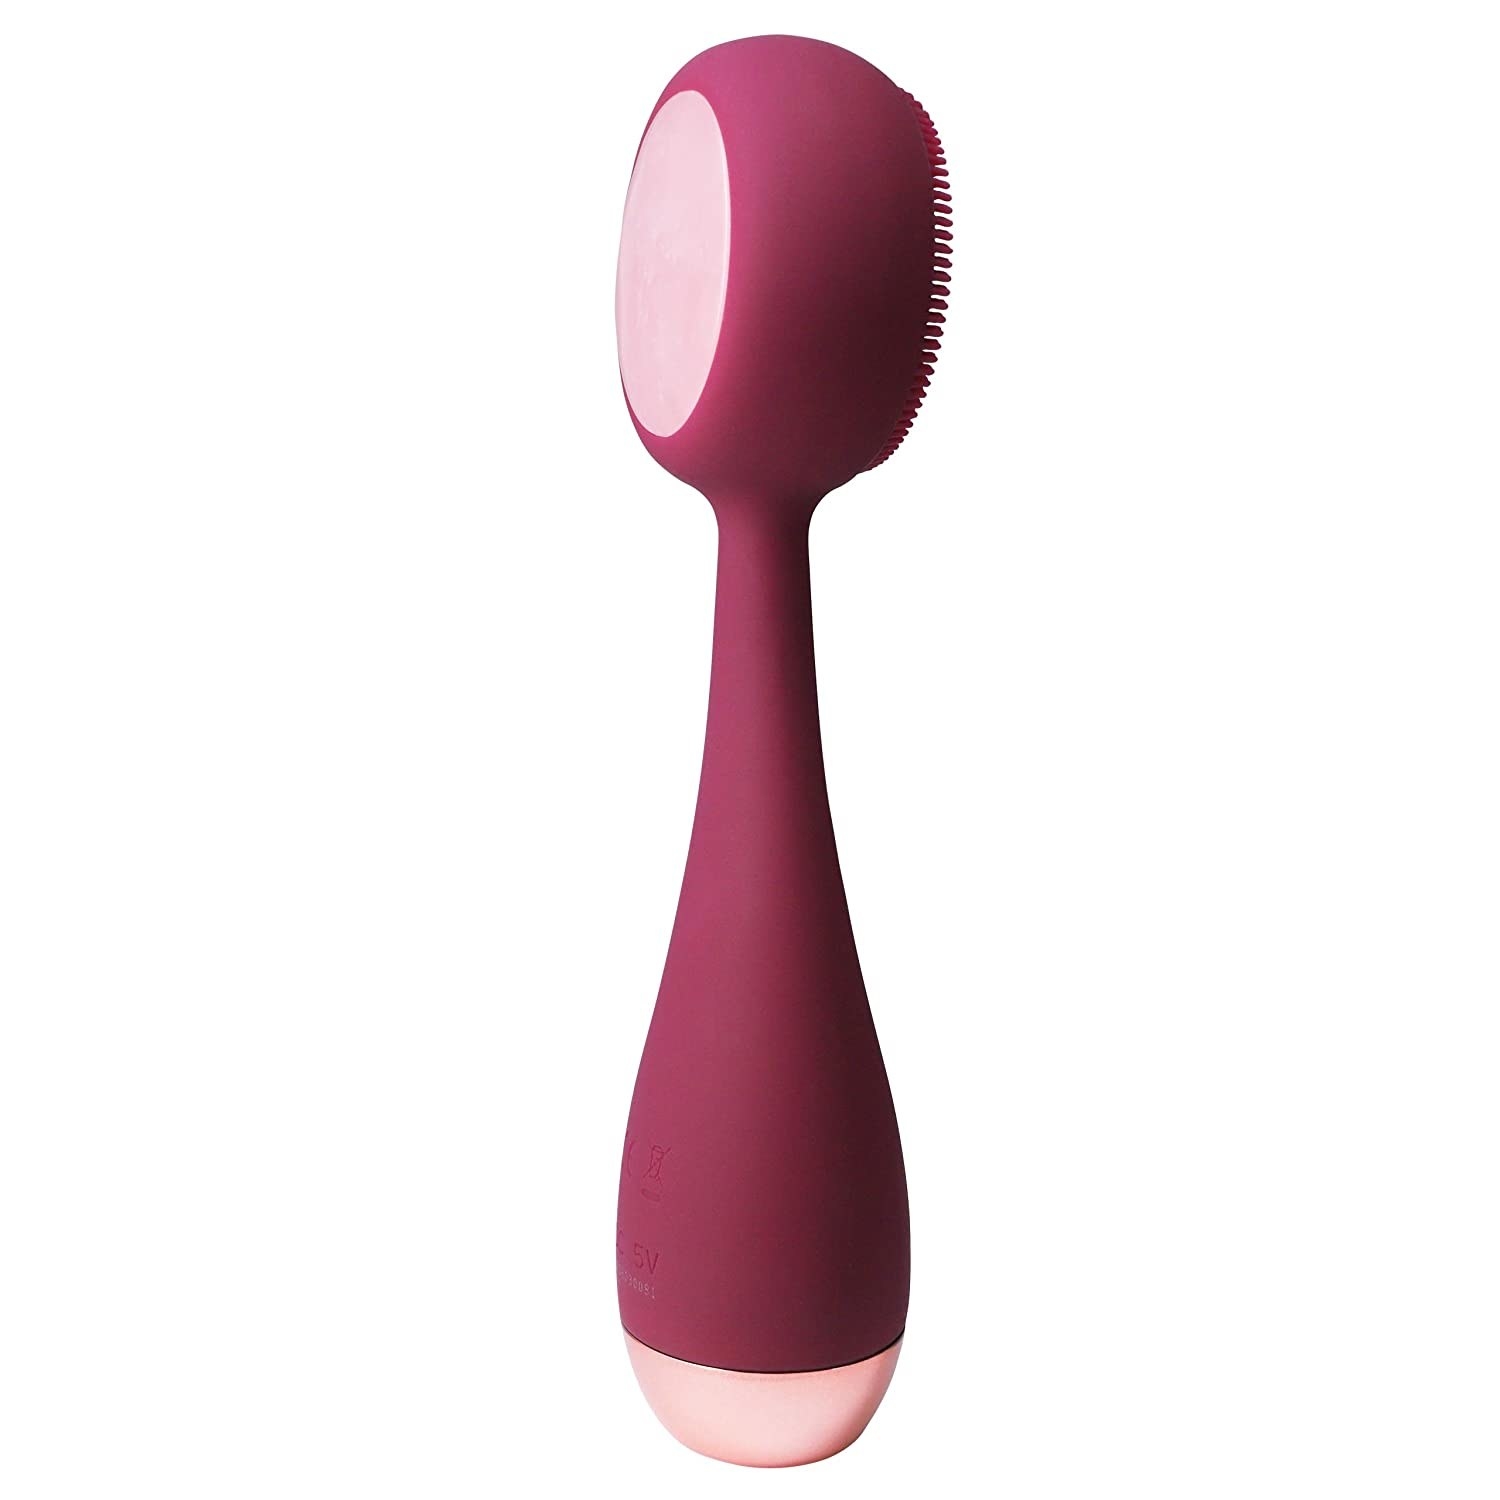 PMD Clean Pro smart facial cleansing device in pink color